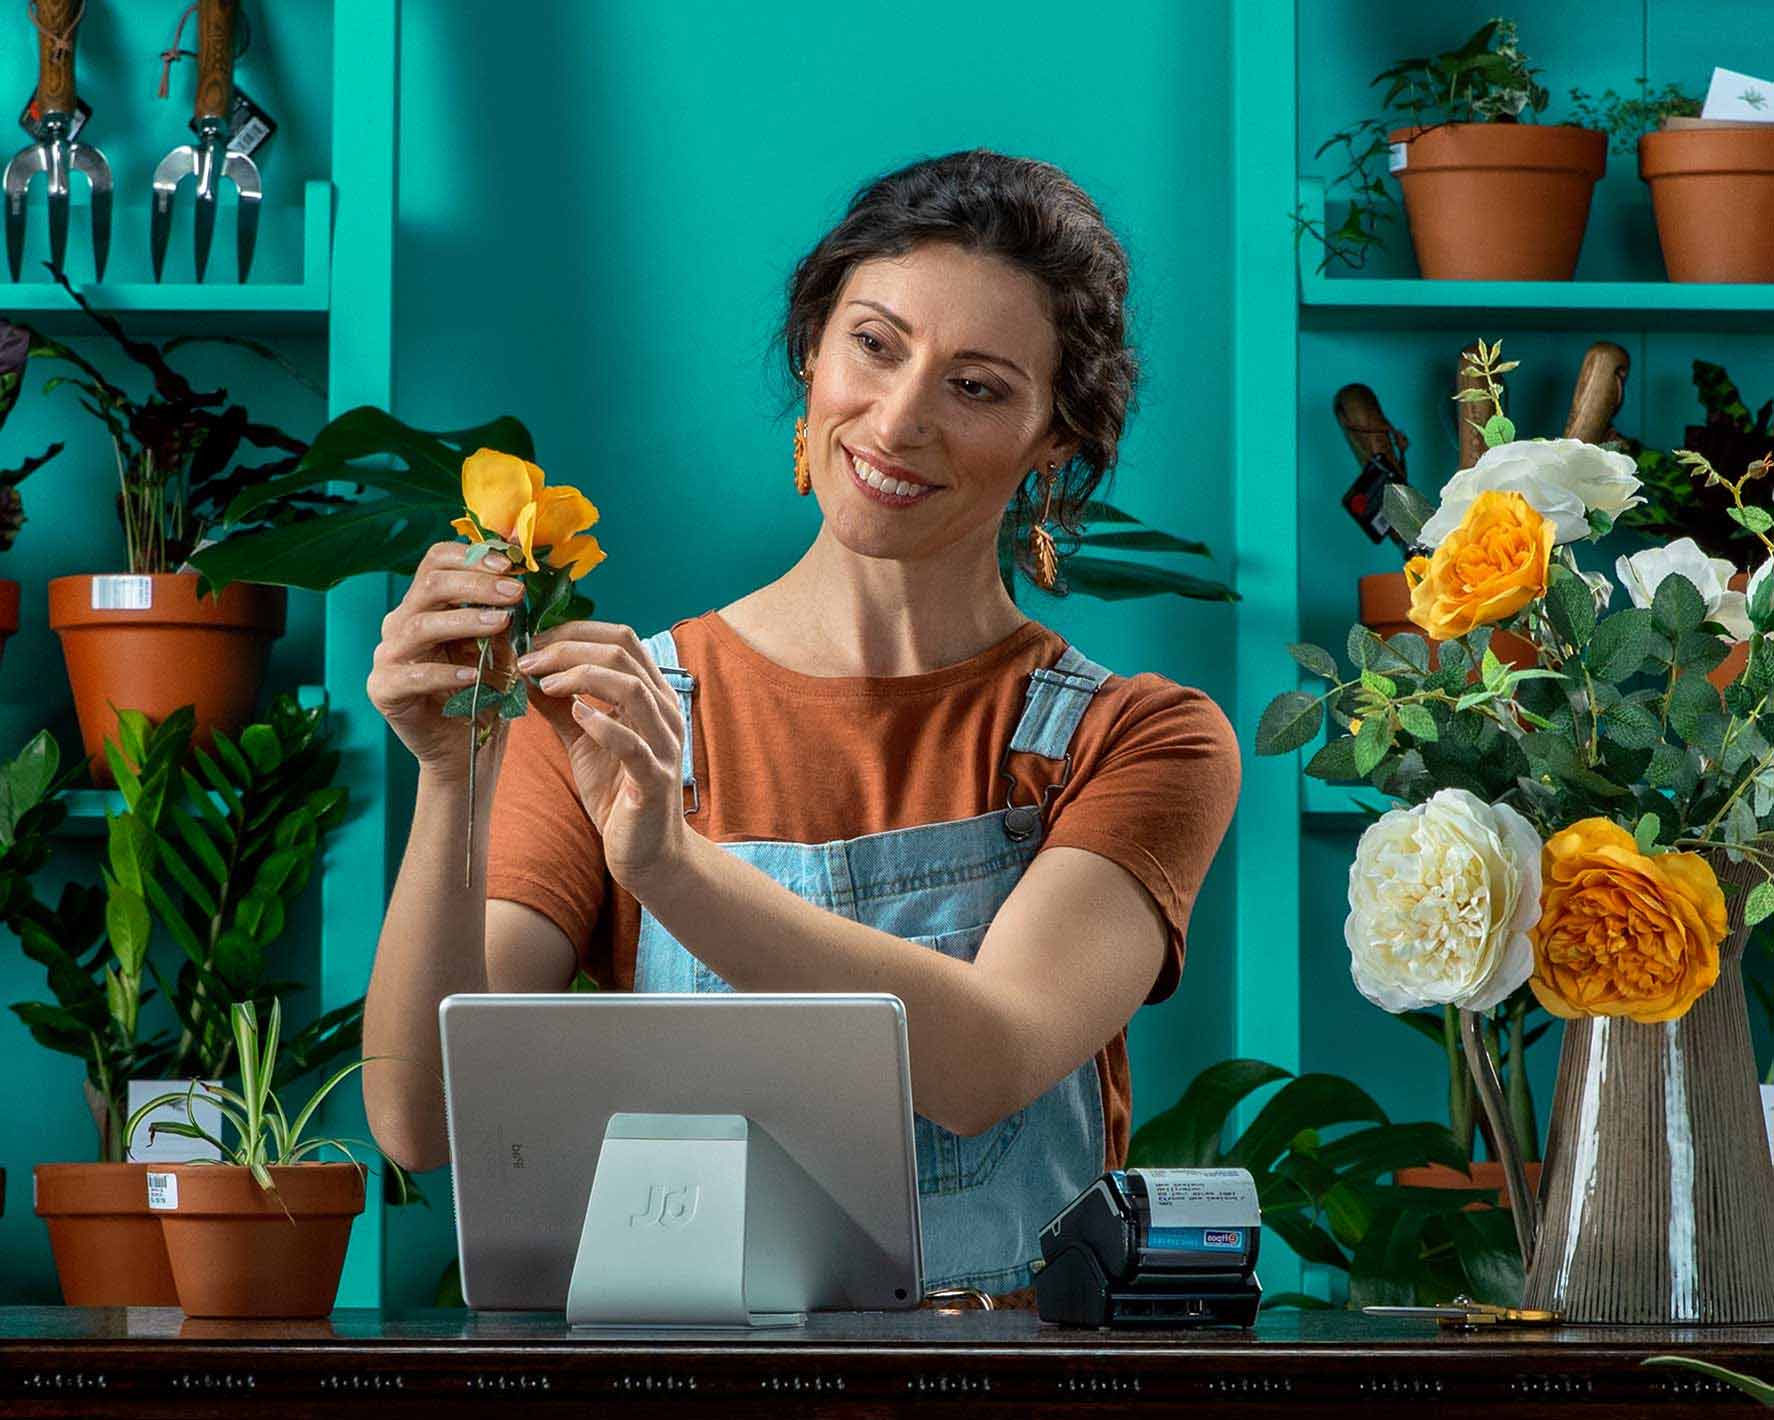 A florist prepares a bunch of flowers and checks their cash flow with Xero’s retail accounting software.